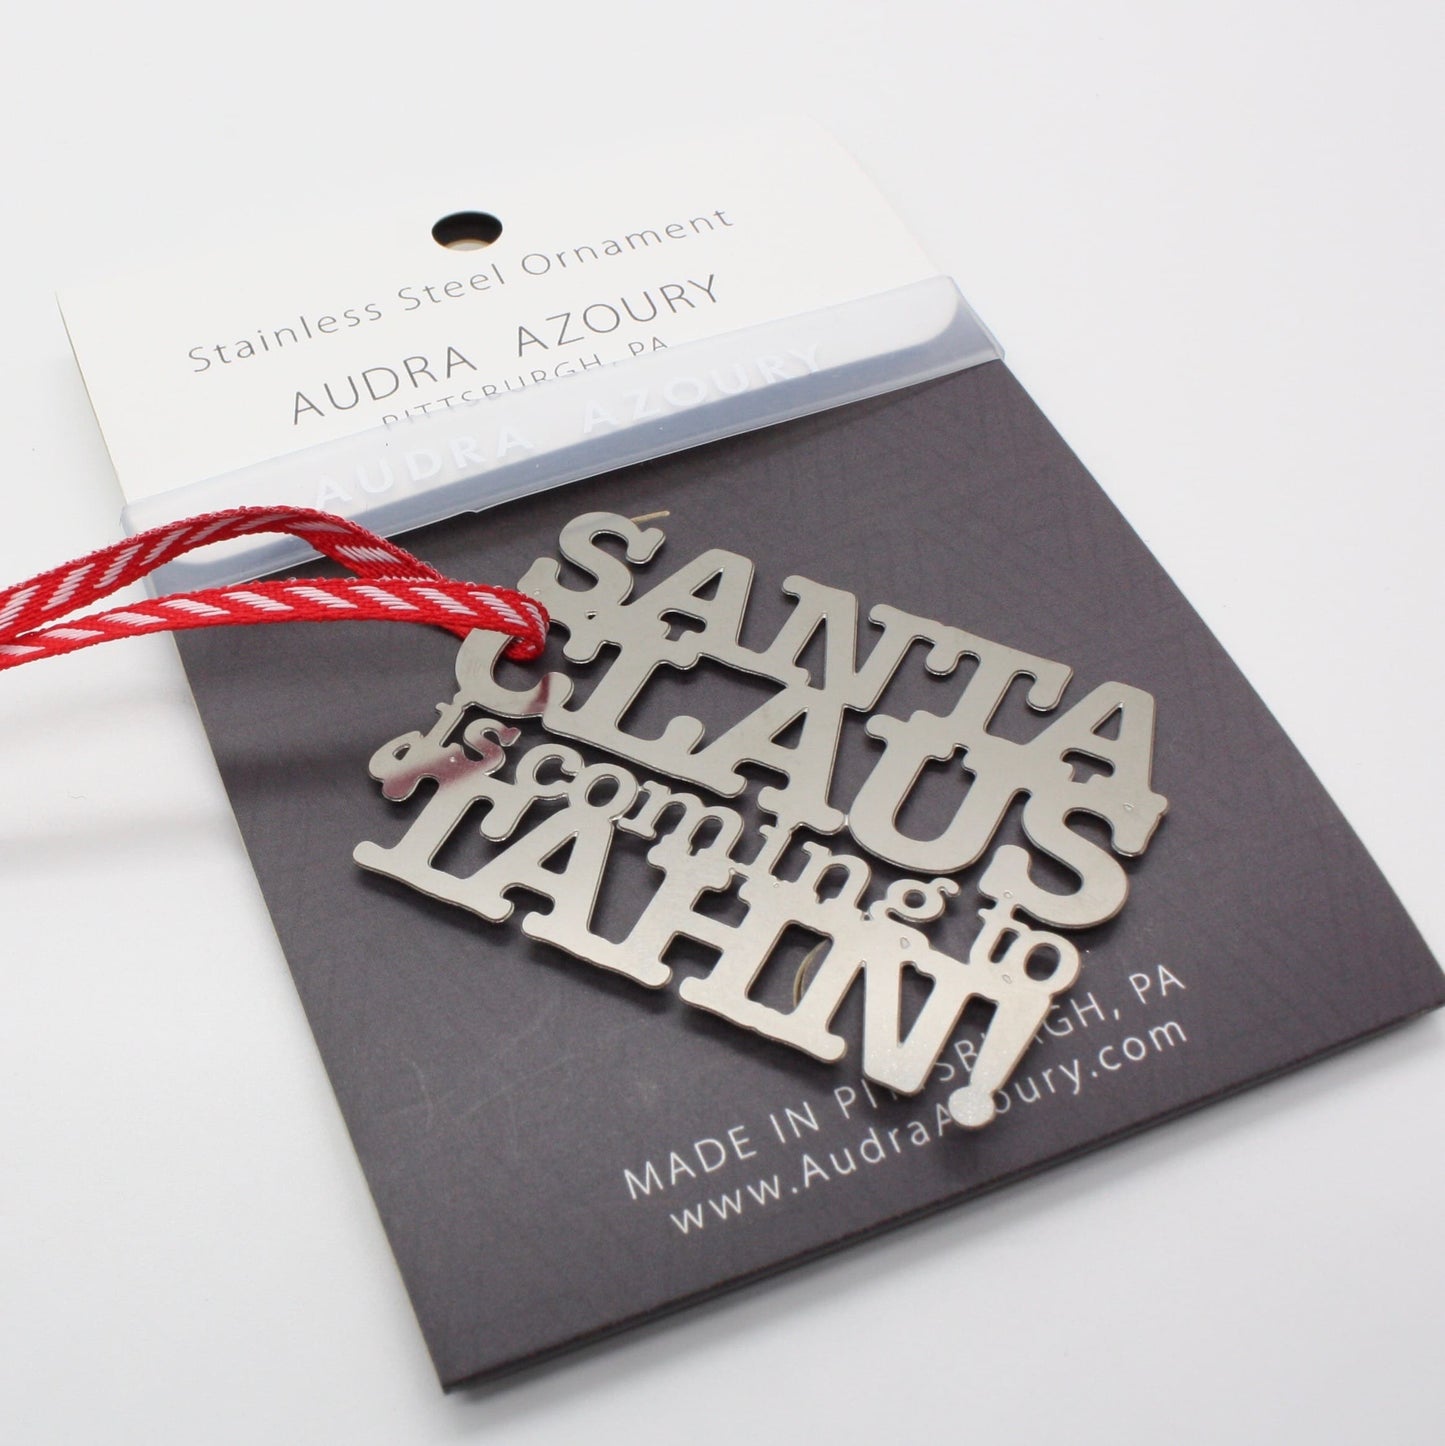 Pittsburghese Ornament | MINI Santa Claus is Coming to 'Tahn- oopsy cut